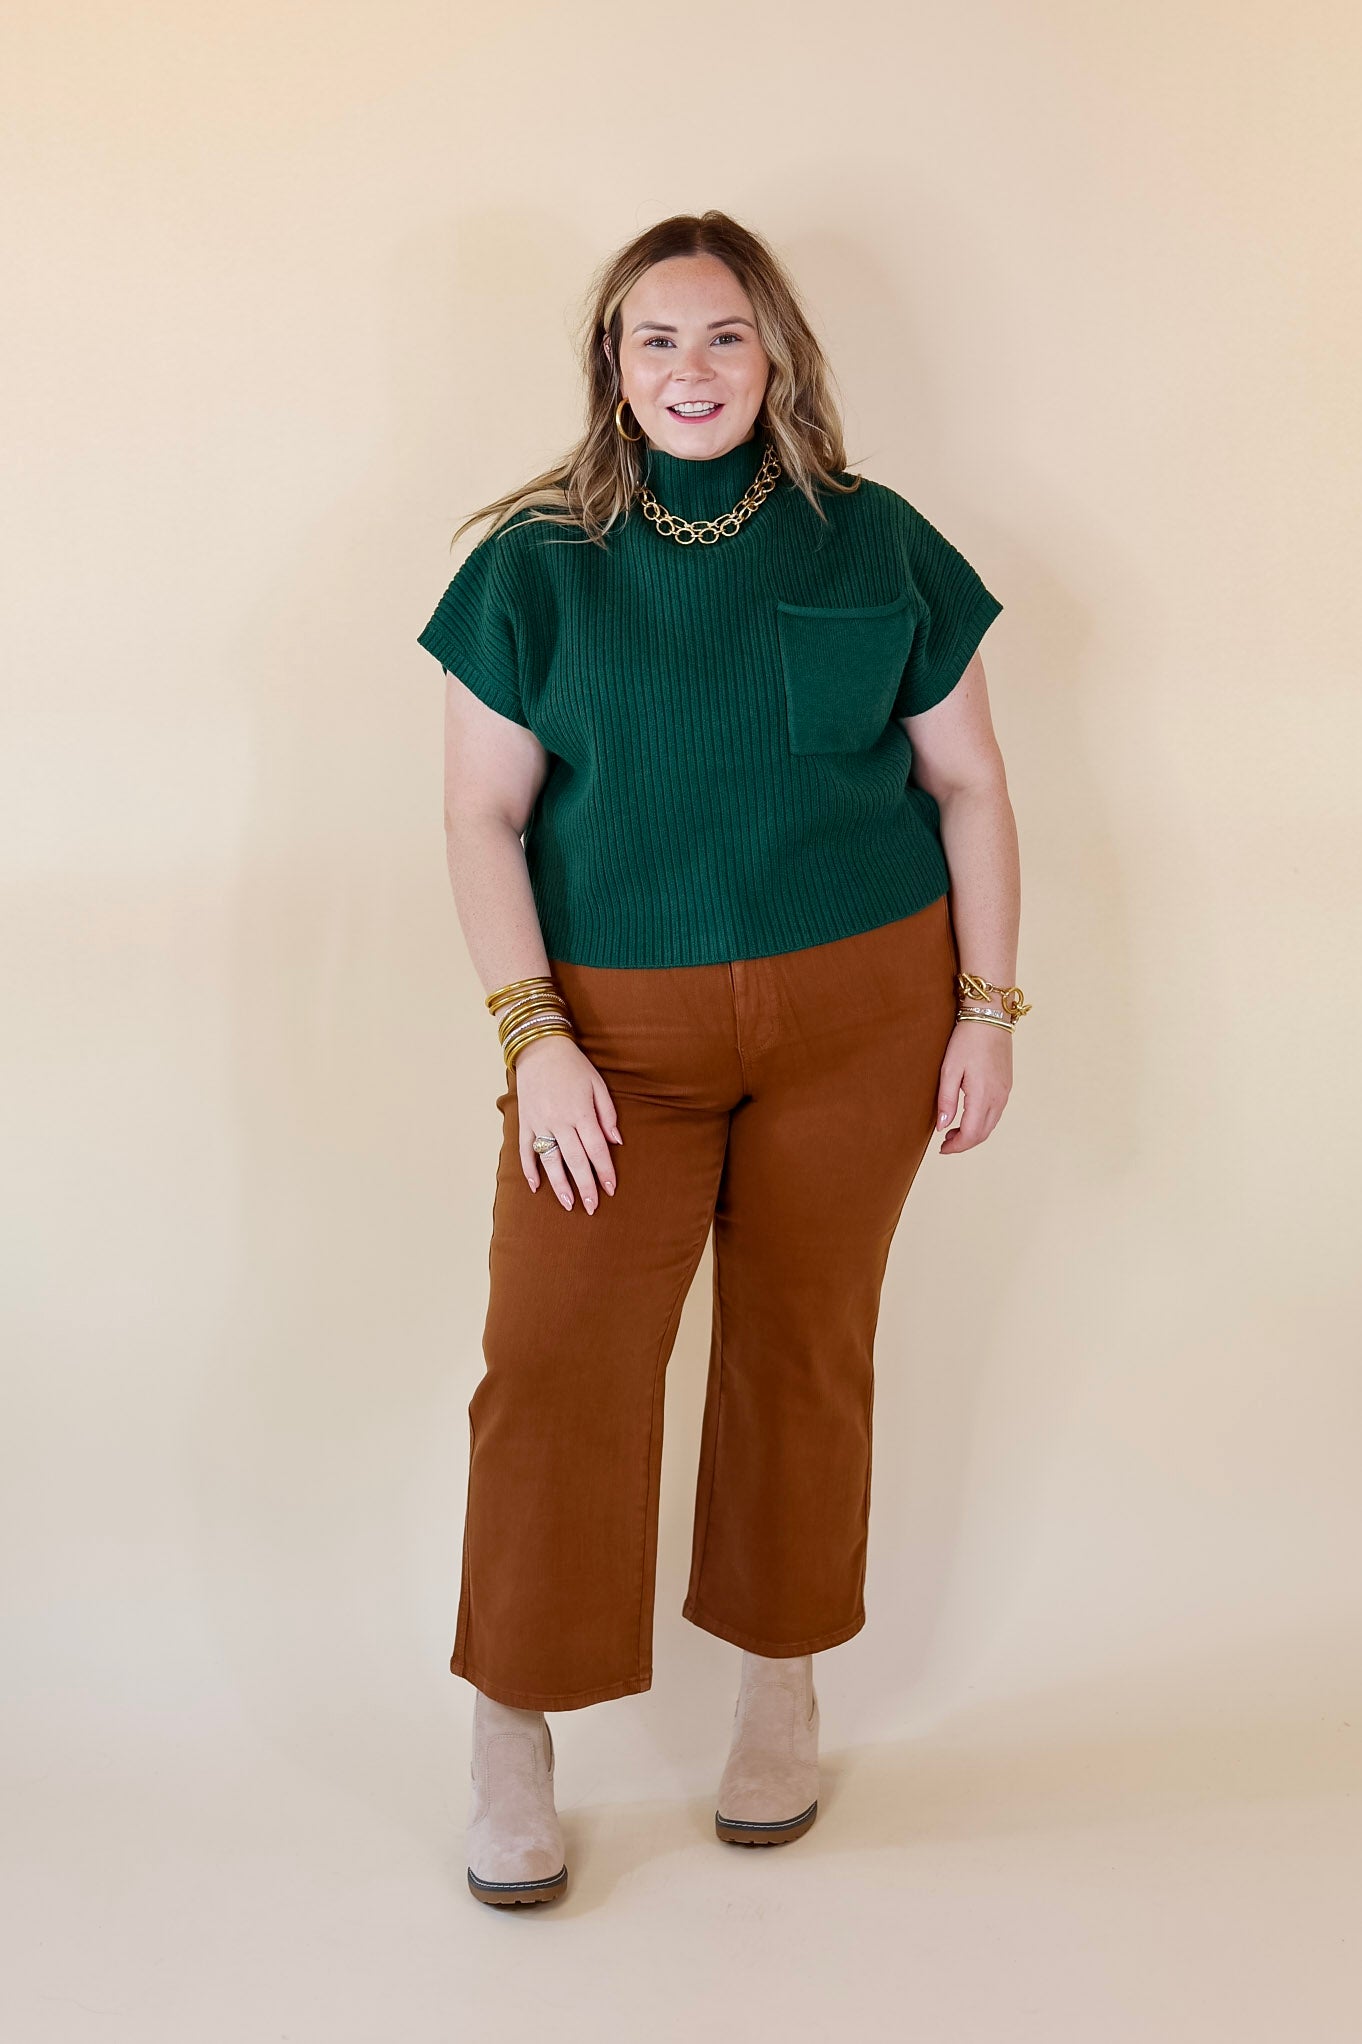 City Sights Cap Sleeve Sweater Top in Hunter Green - Giddy Up Glamour Boutique